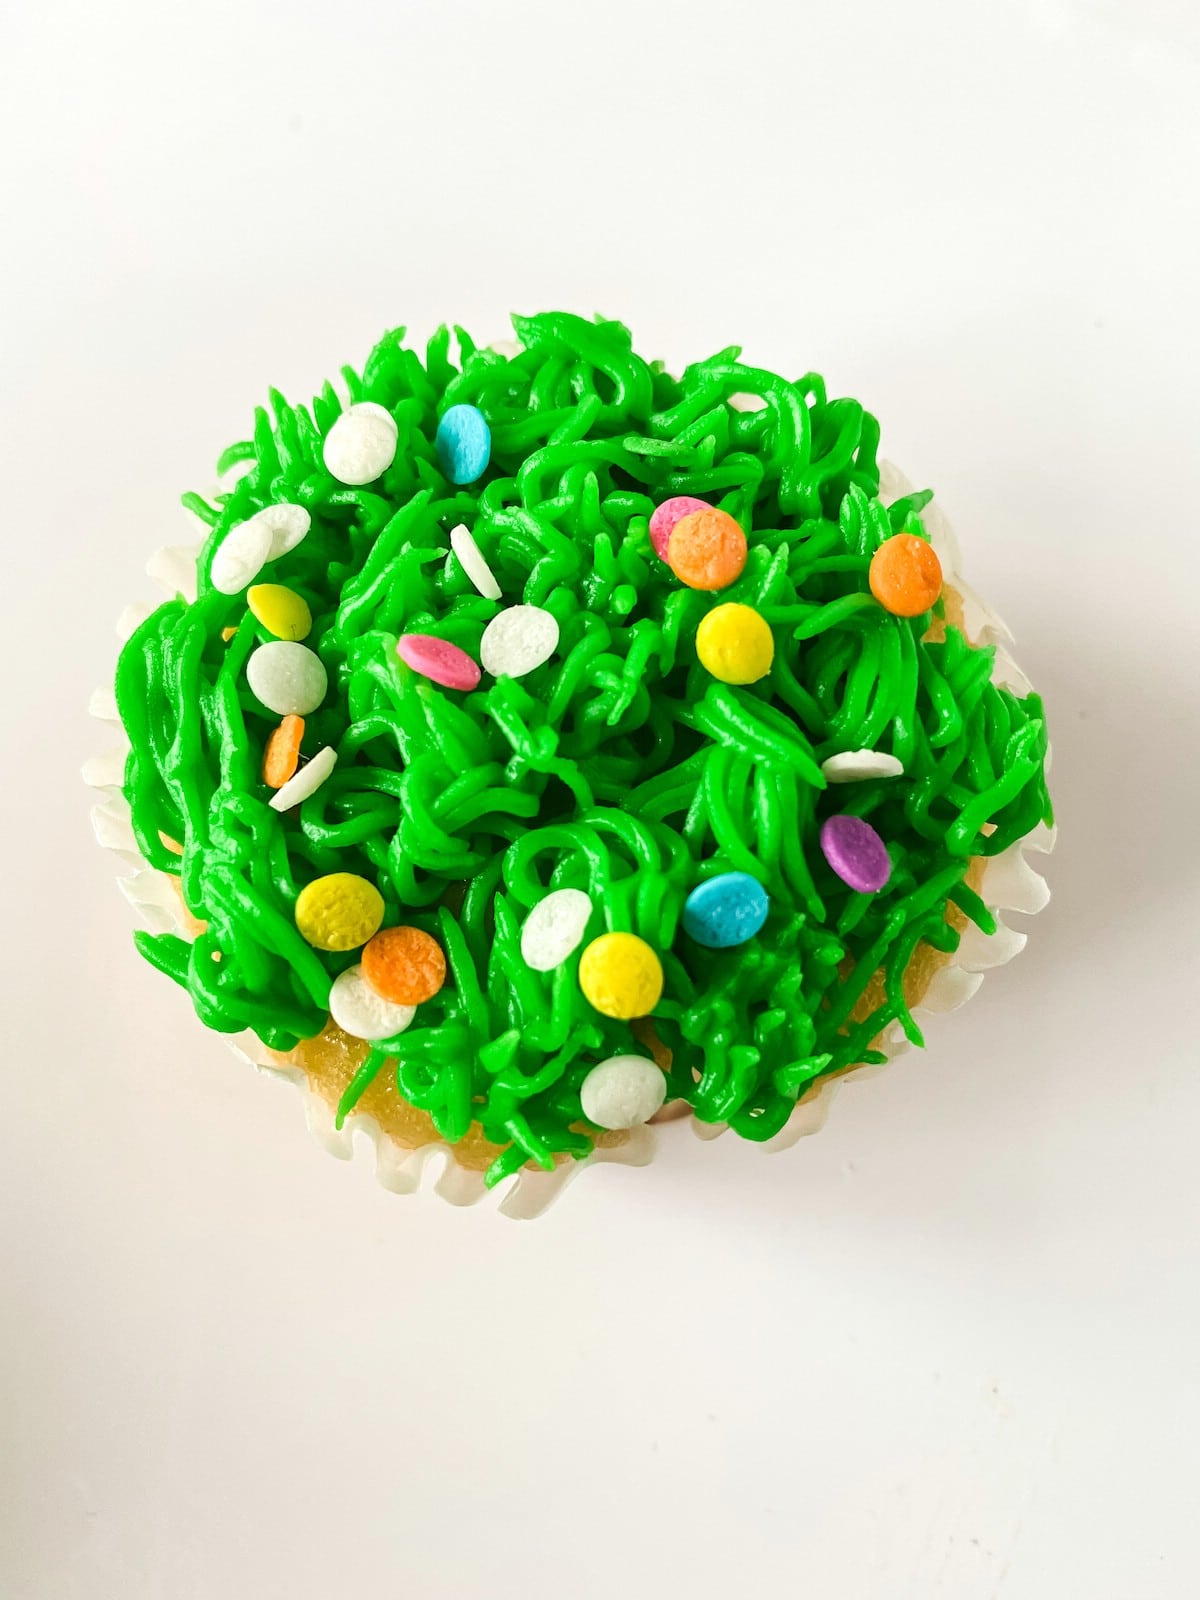 Cupcake with green icing and sprinkles on white table